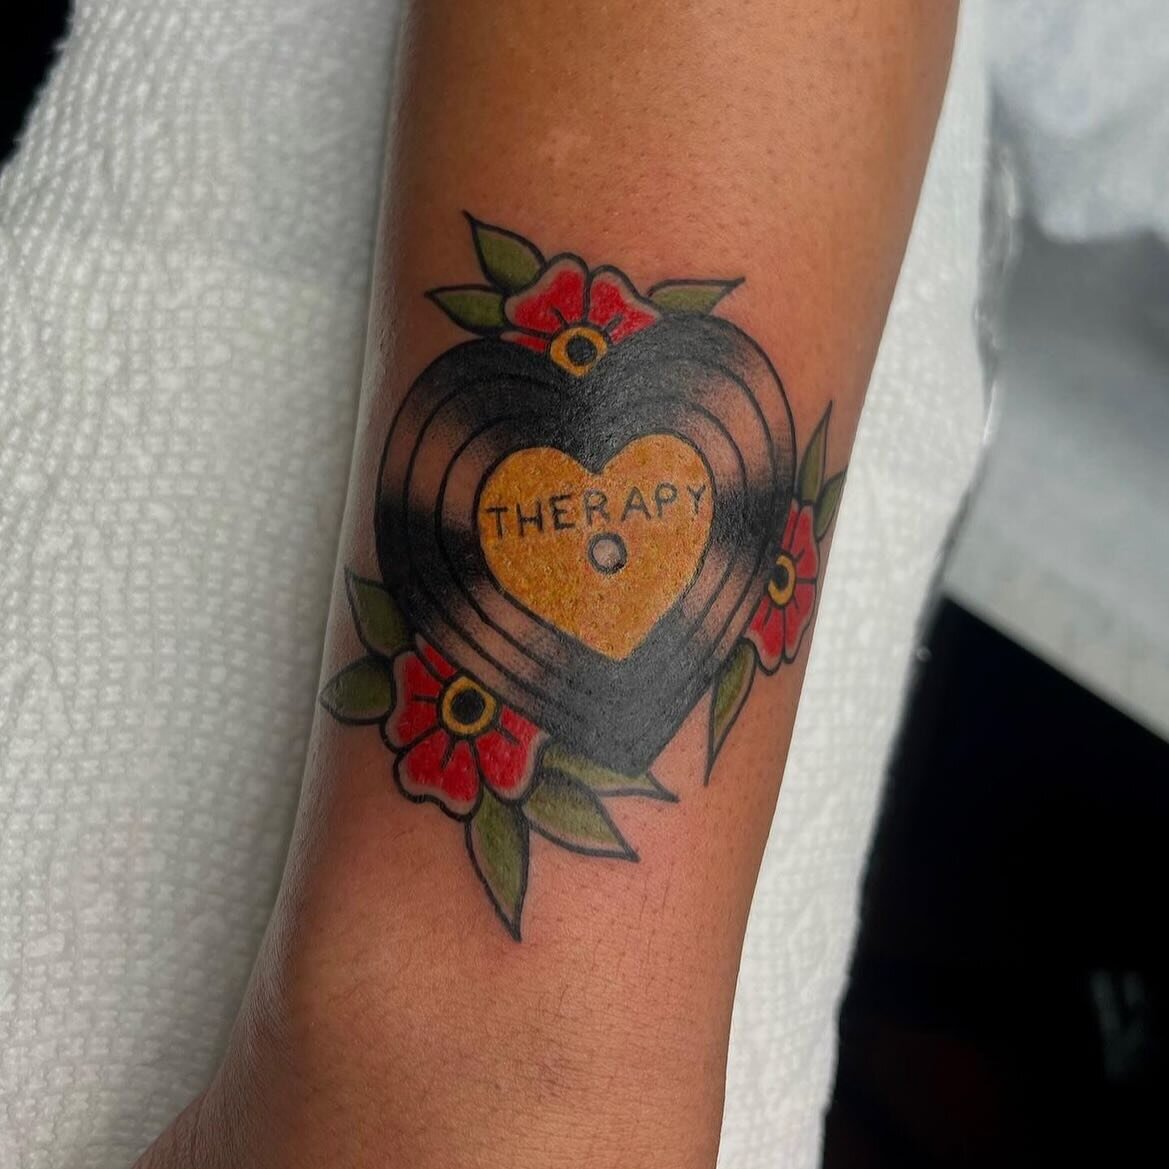 Groovy heart record done by @crybbyink 🎵❤️

Maeve is taking walk-ins all March long! You can also head on over to thirdseasontattoo.com to set up an appointment with her as well! 

#tattoo #tattooartist #tradtionaltattoo #tradtattoos #traditionaltat